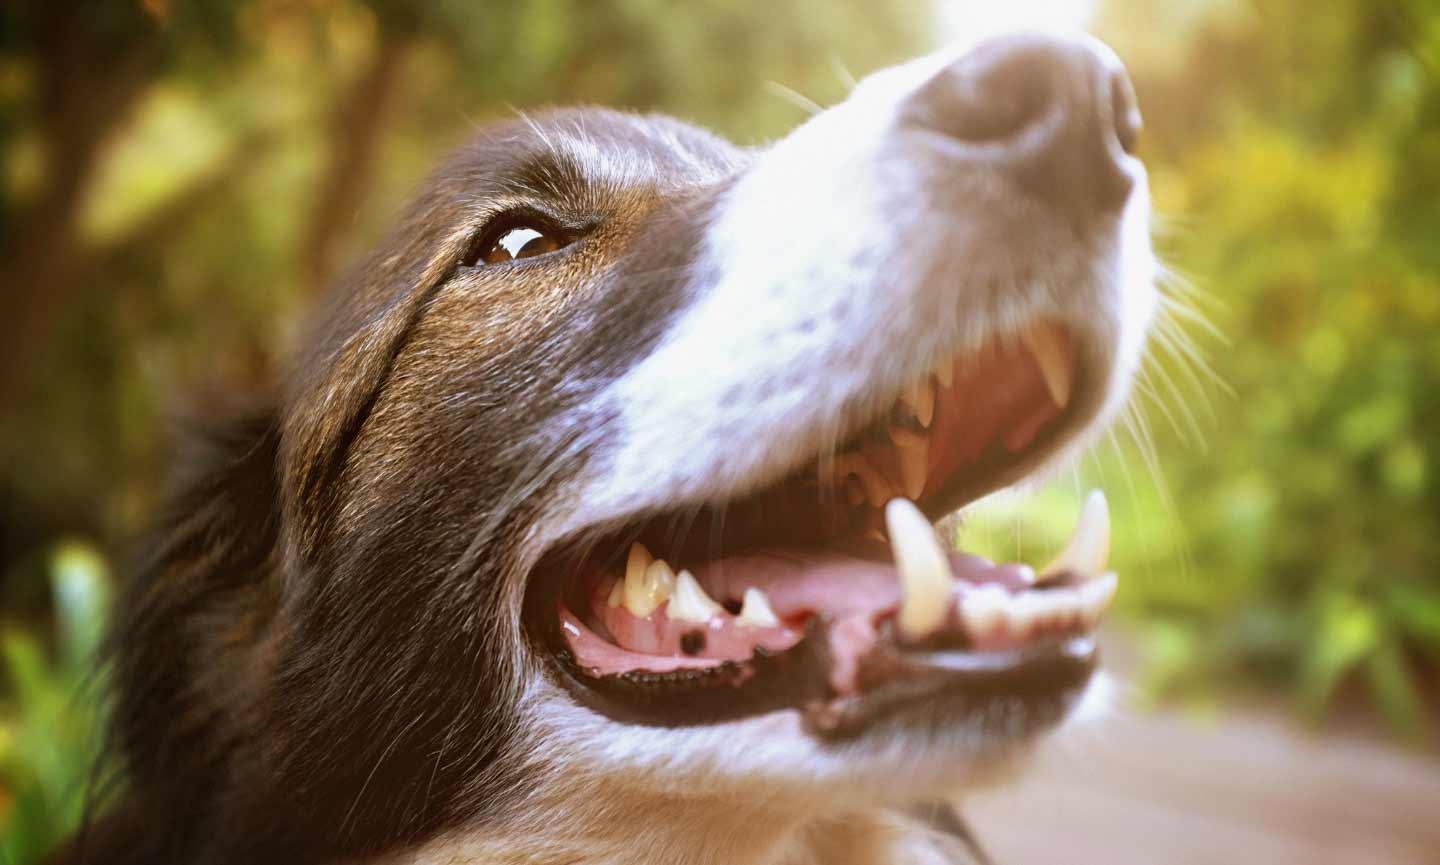 Close-up photo of a dog with their mouth open, showing their teeth